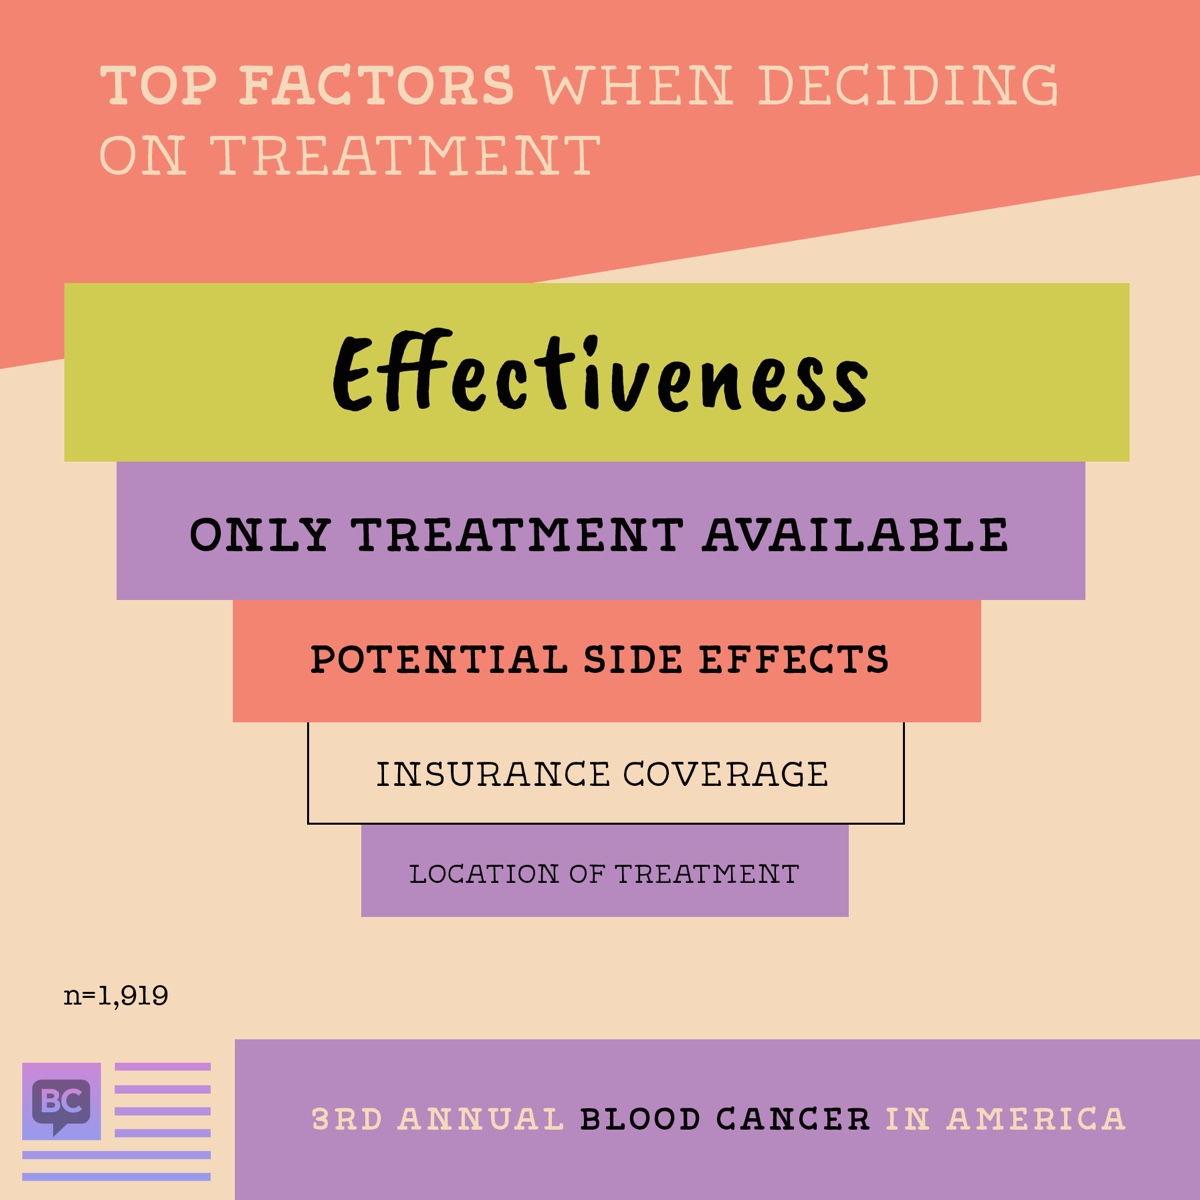 Top factors when deciding on treatment: Effectiveness, only treatment available, potential side effects, insurance coverage, location of treatment